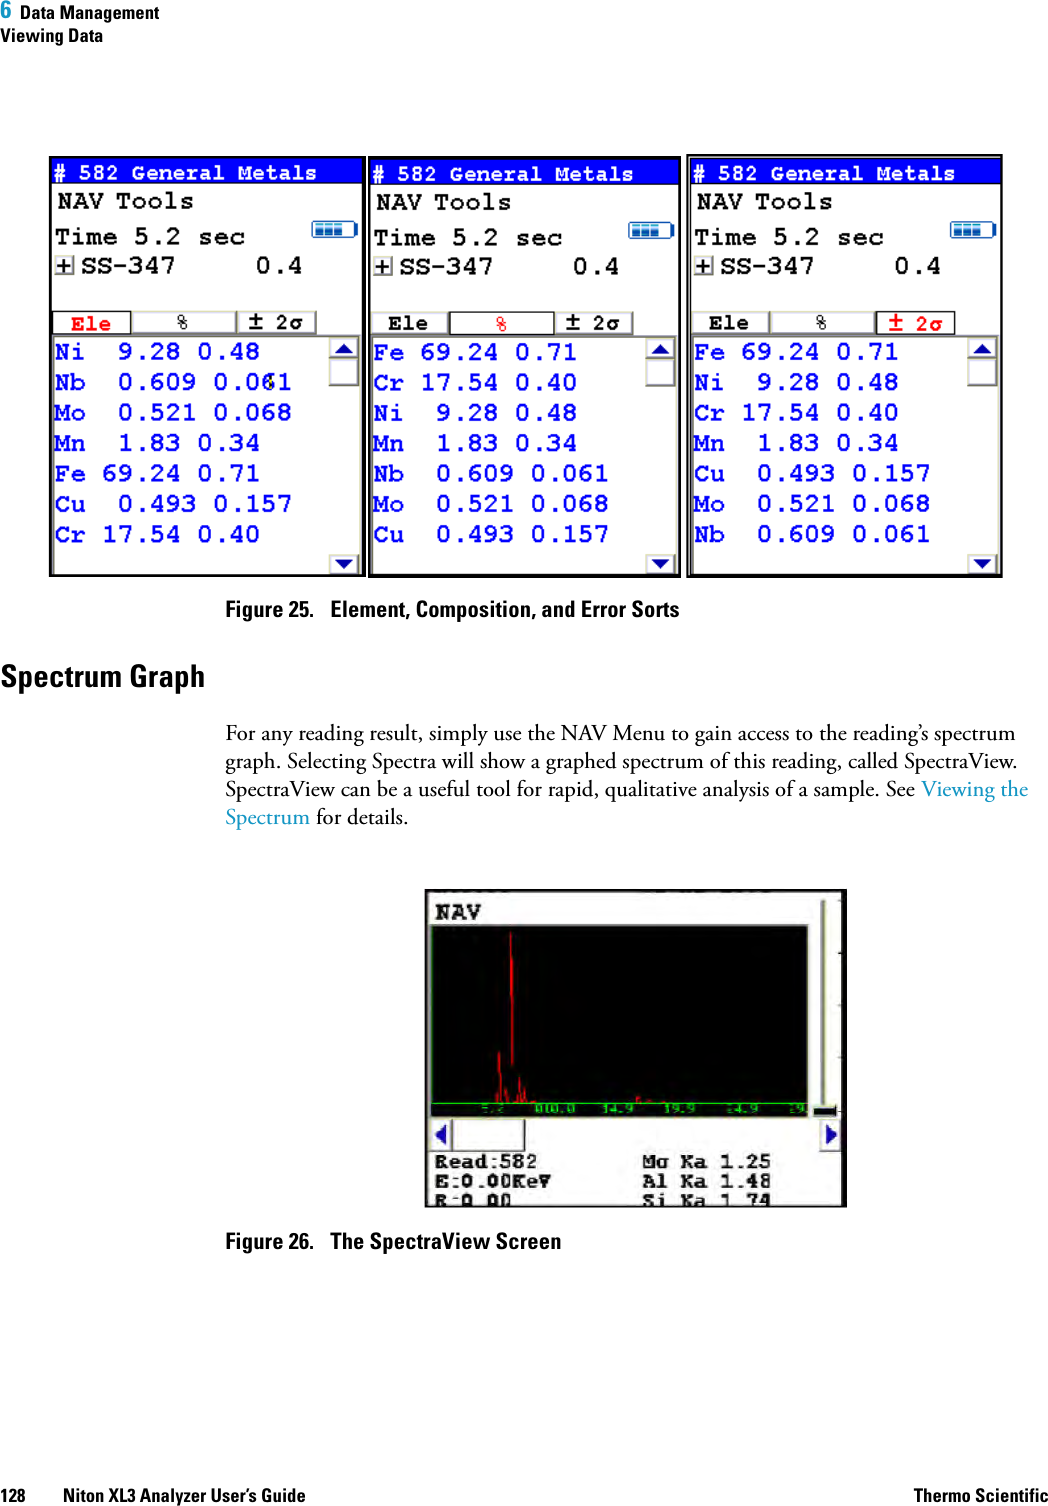 6  Data ManagementViewing Data128 Niton XL3 Analyzer User’s Guide Thermo ScientificFigure 25.  Element, Composition, and Error SortsSpectrum GraphFor any reading result, simply use the NAV Menu to gain access to the reading’s spectrum graph. Selecting Spectra will show a graphed spectrum of this reading, called SpectraView. SpectraView can be a useful tool for rapid, qualitative analysis of a sample. See Viewing the Spectrum for details.Figure 26.  The SpectraView Screen